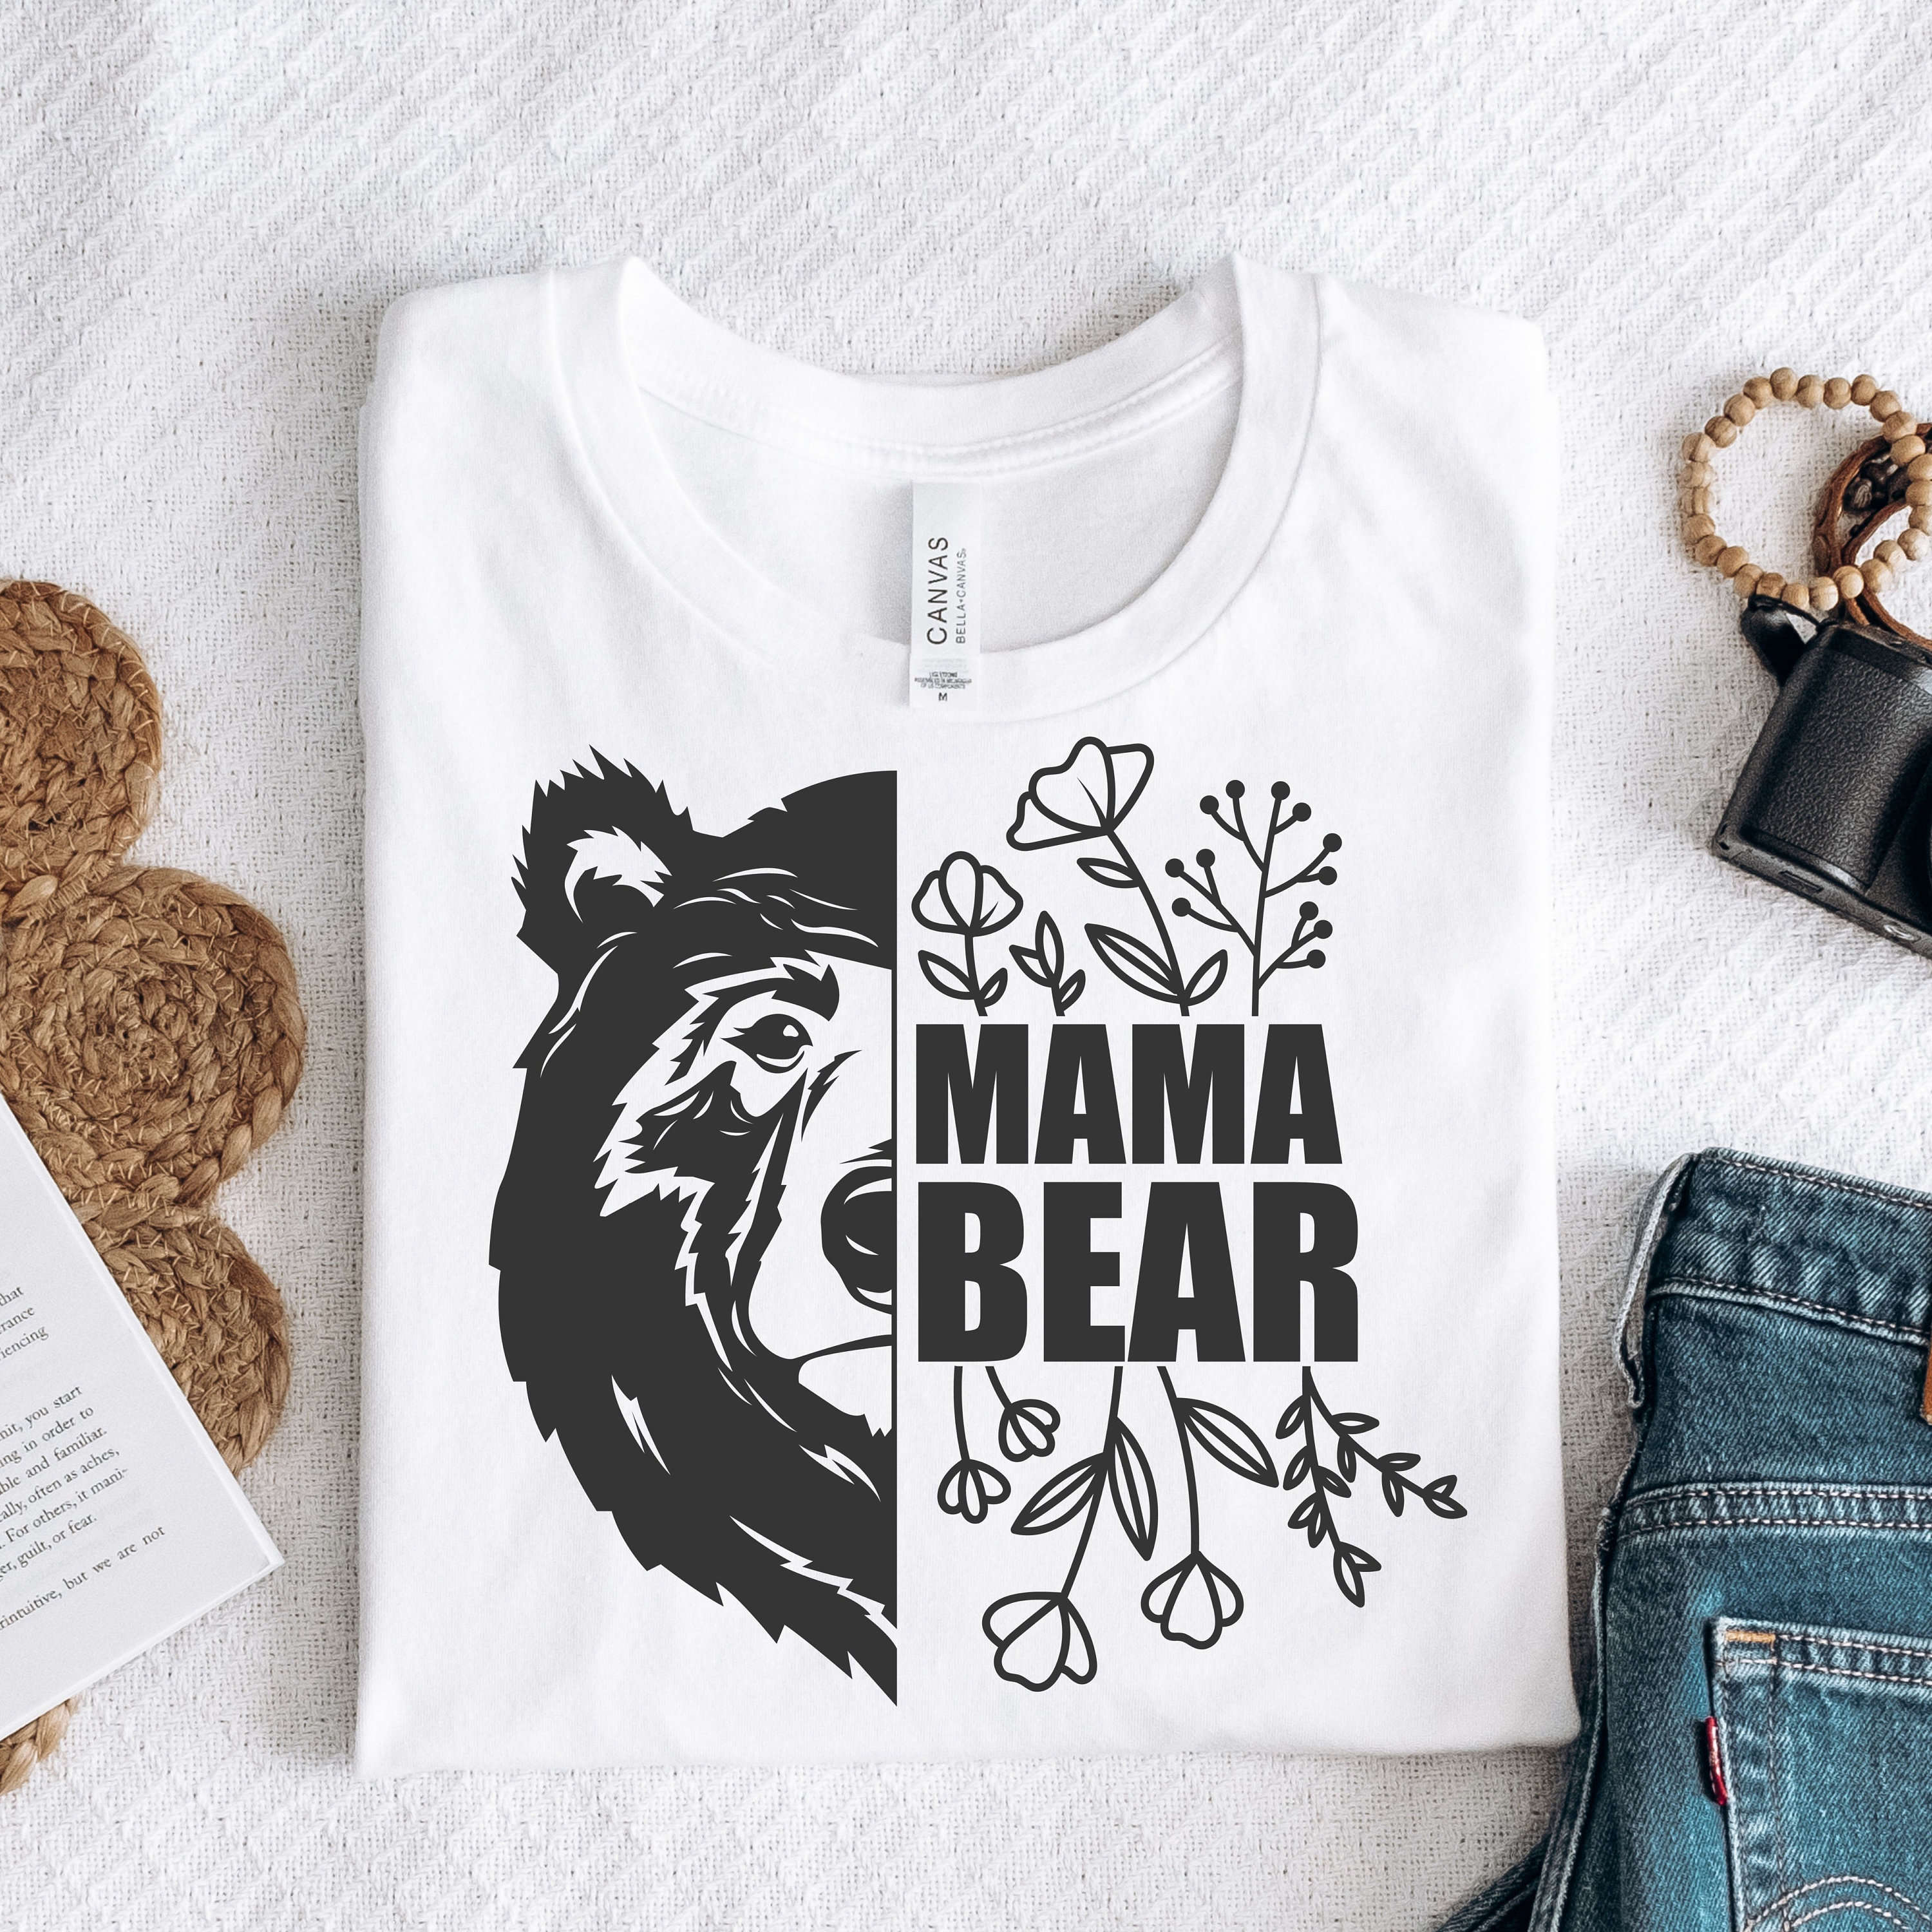 Cute Mom Shirt: Mother s Day Gift Custom Mama T-shirt Best Mom Gift – Shop Now!